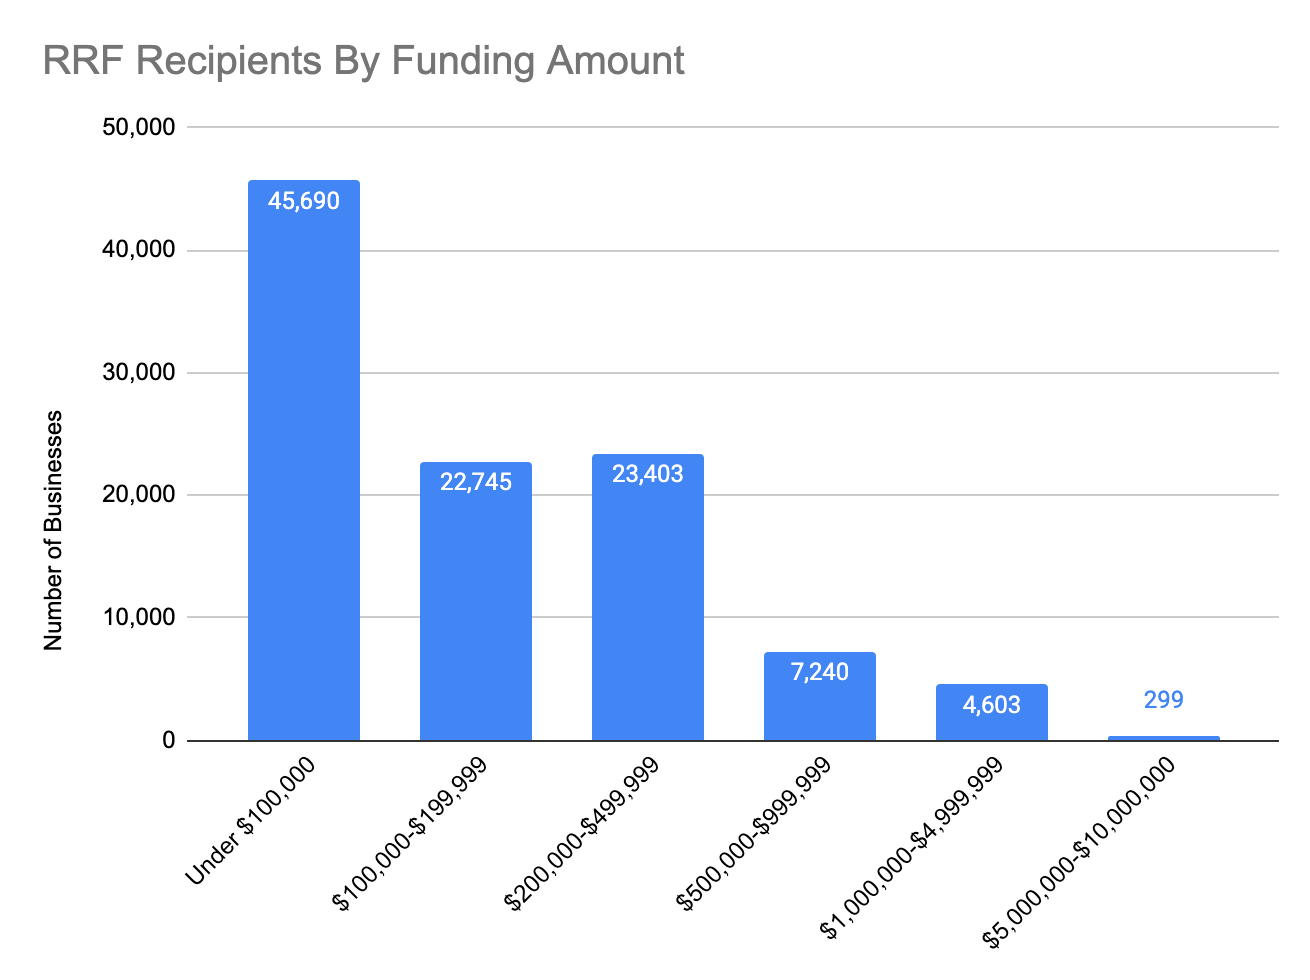 https://static.helloskip.com/blog/2021/07/RRF-Funding-Recipients-by-Funding-Amount.png